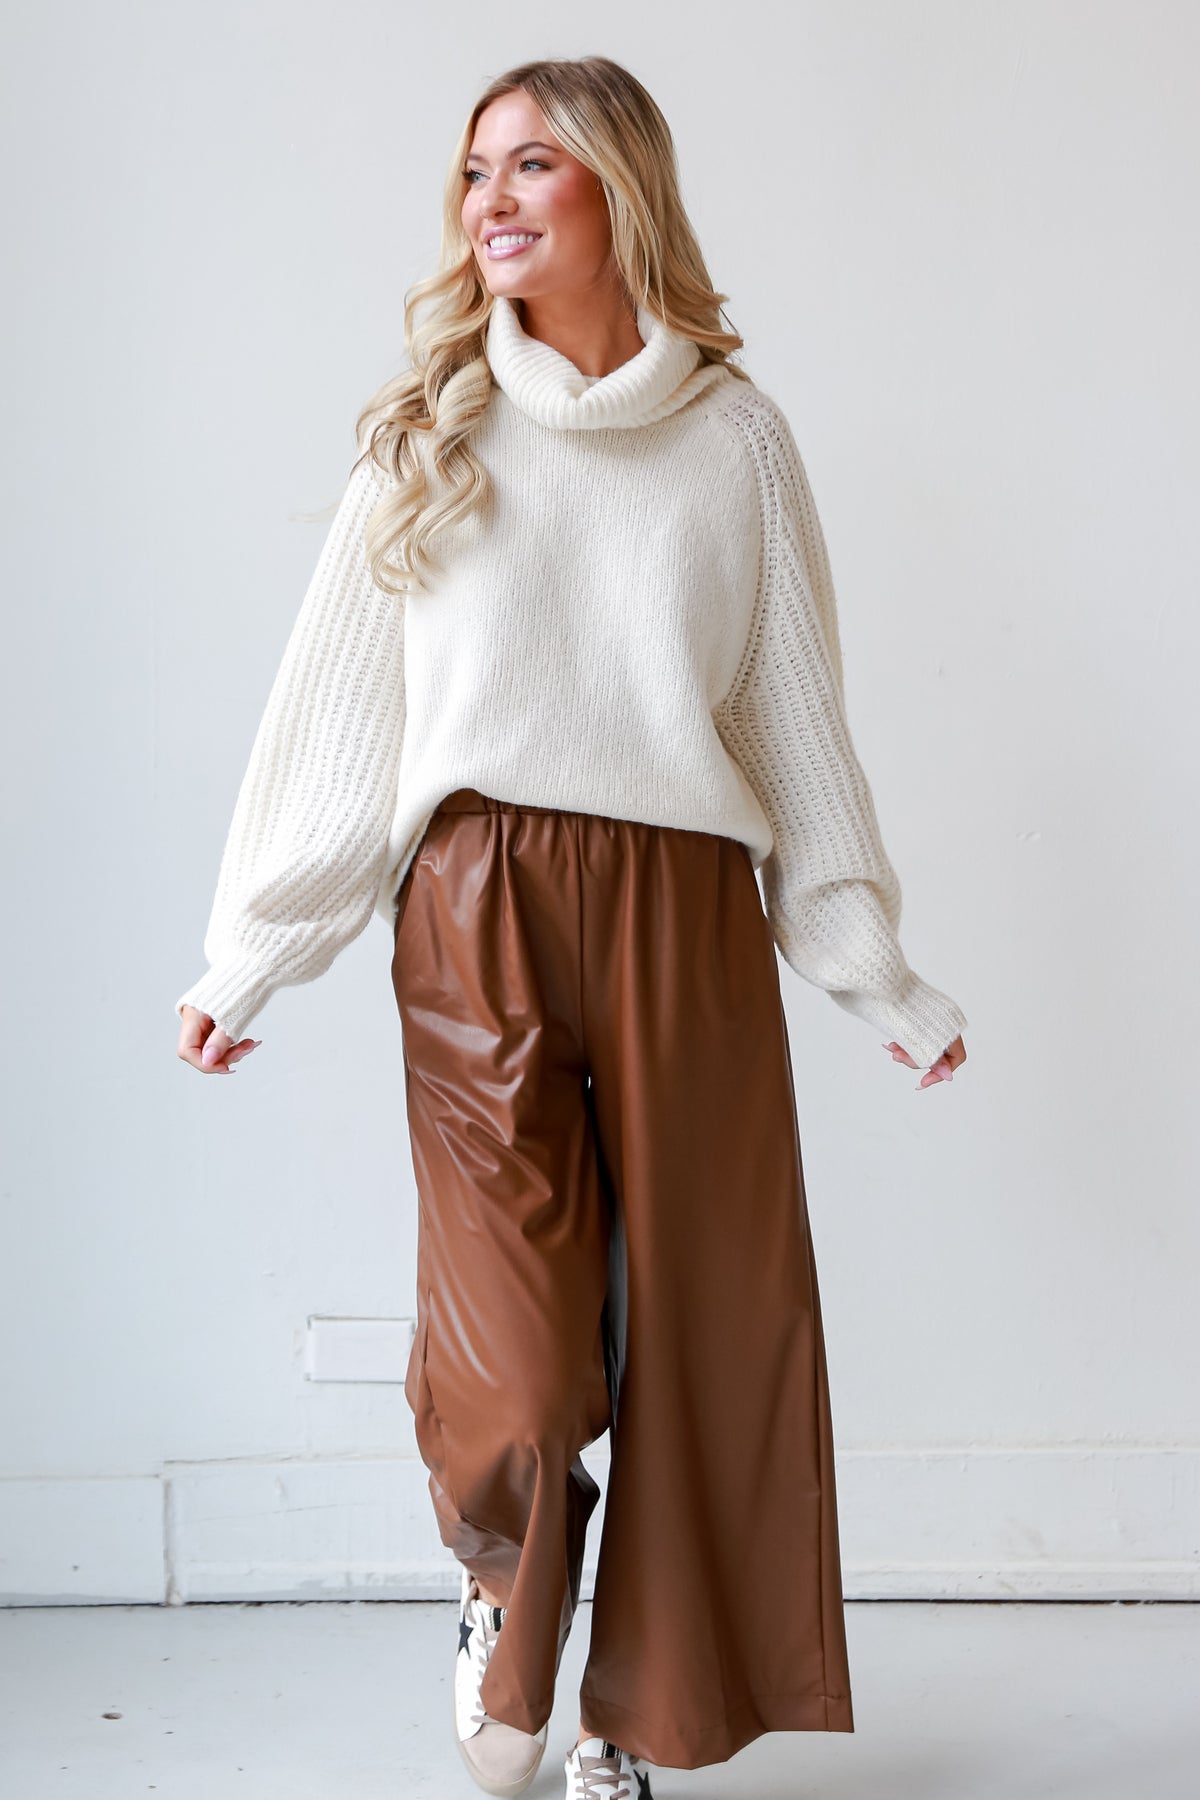 Chic Camel Leather Pants, Trendy Pants For Women